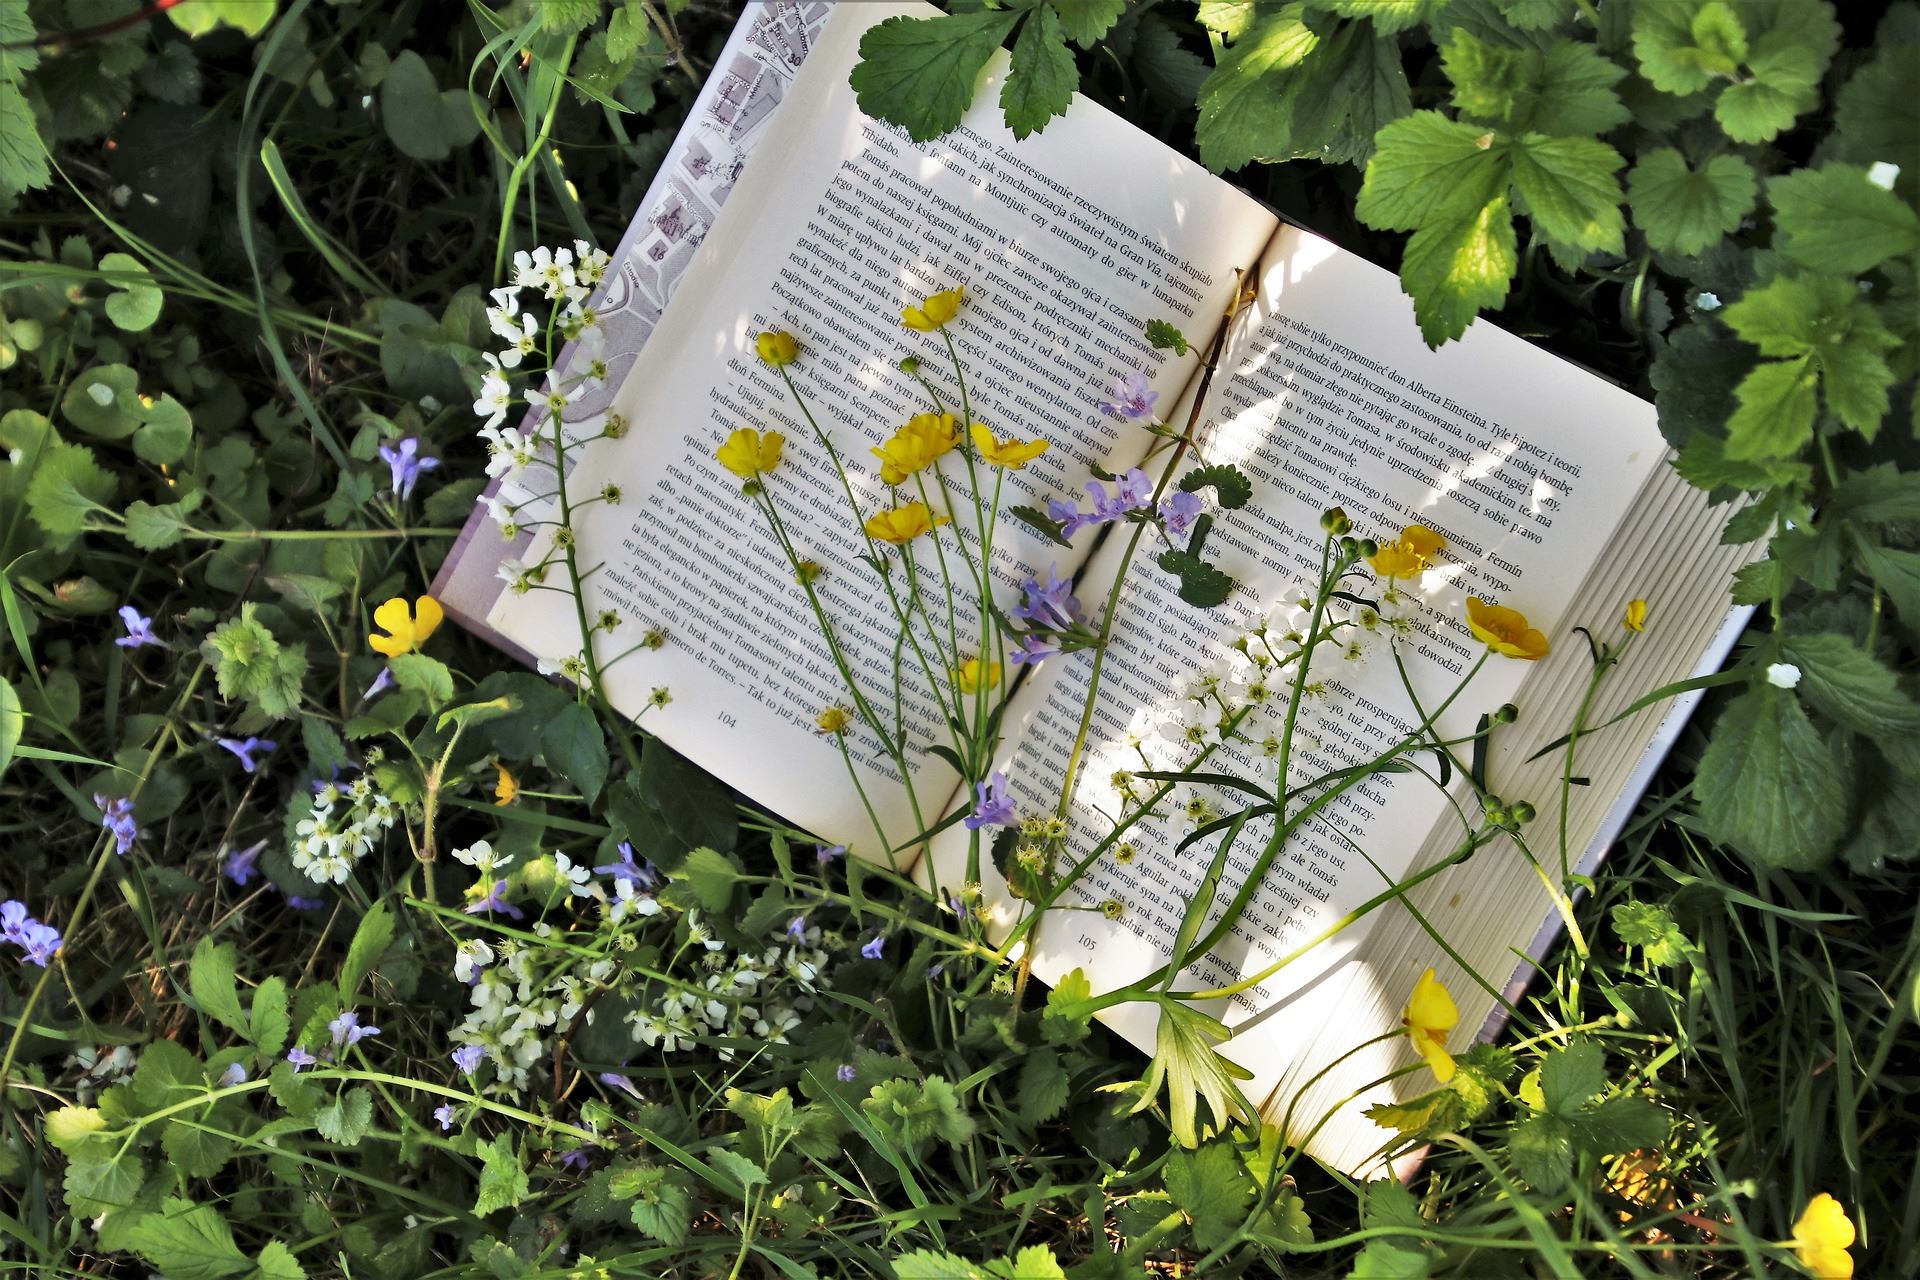 Book in a field of flowers to represent Educational resources